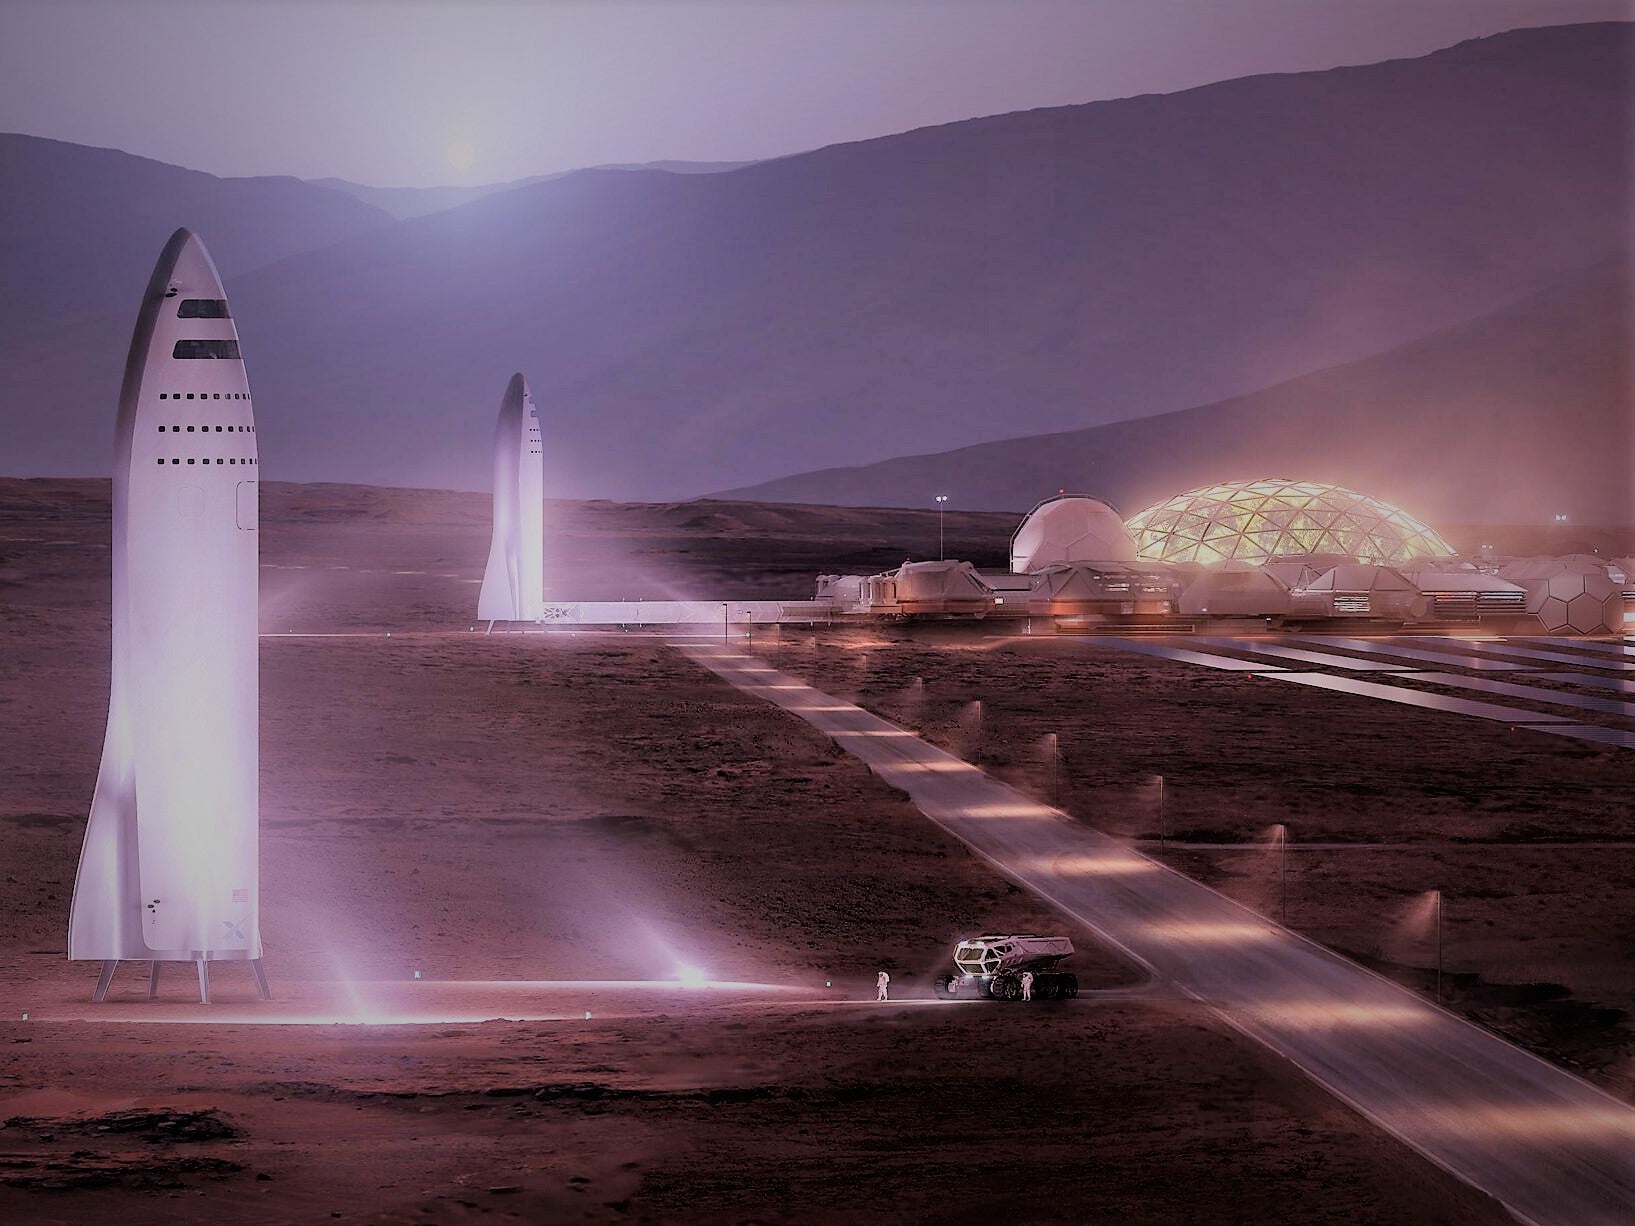 SpaceX plans to build a fleet of 1,000 Mars-bound Starship rockets, each capable of carrying 100 people